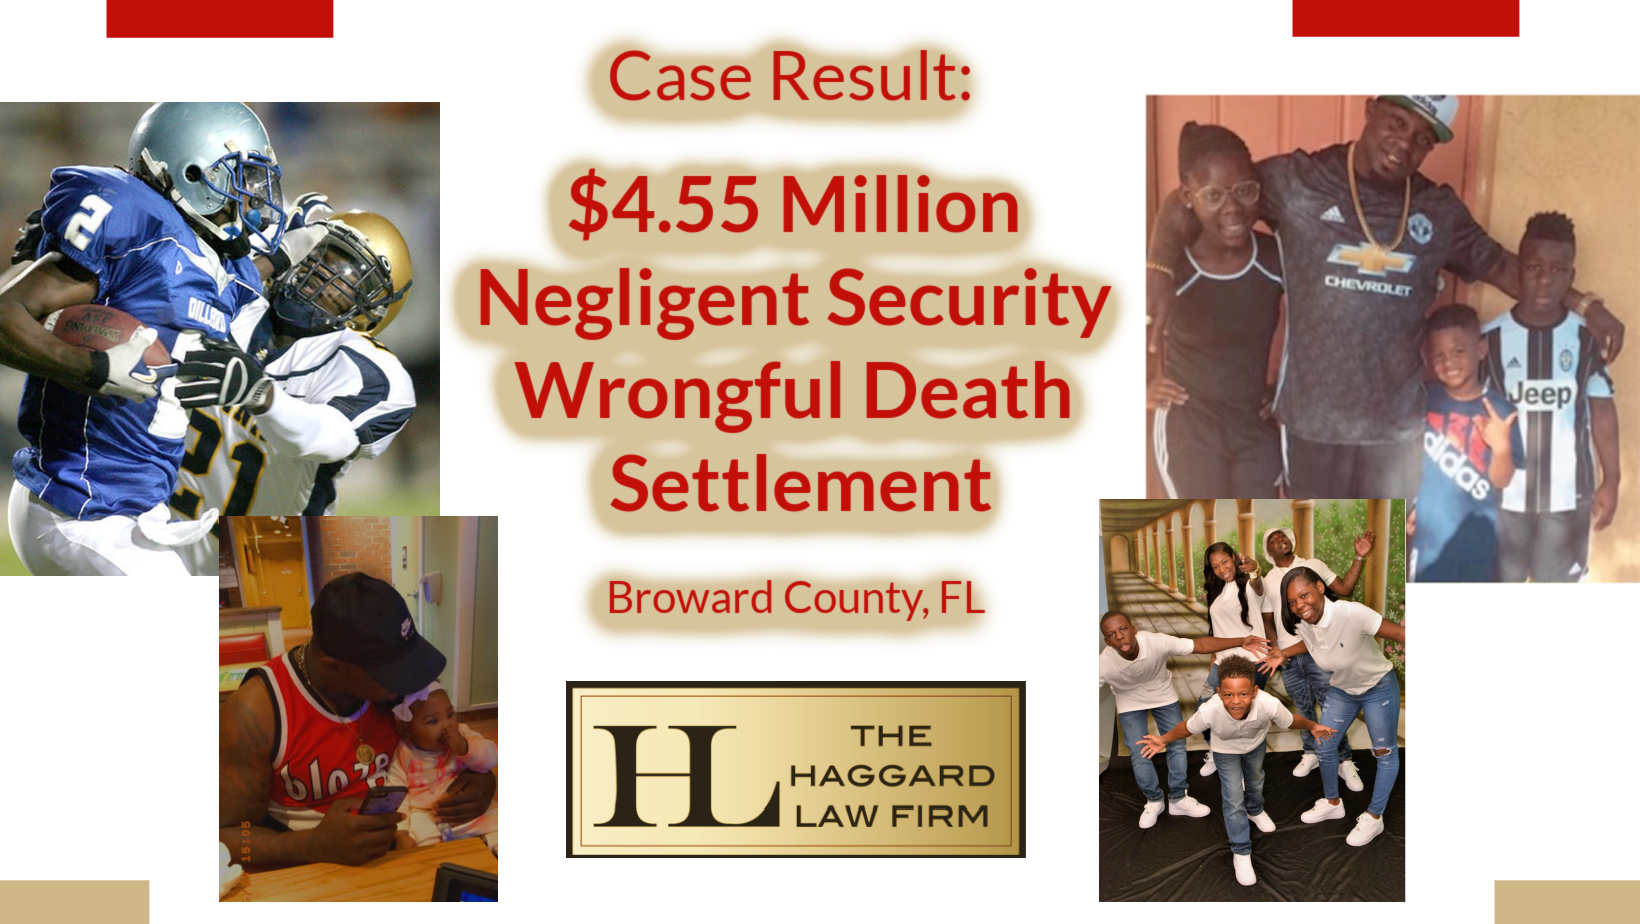 $4.55 Million Obtained in Broward County Negligent Security Wrongful Death Case